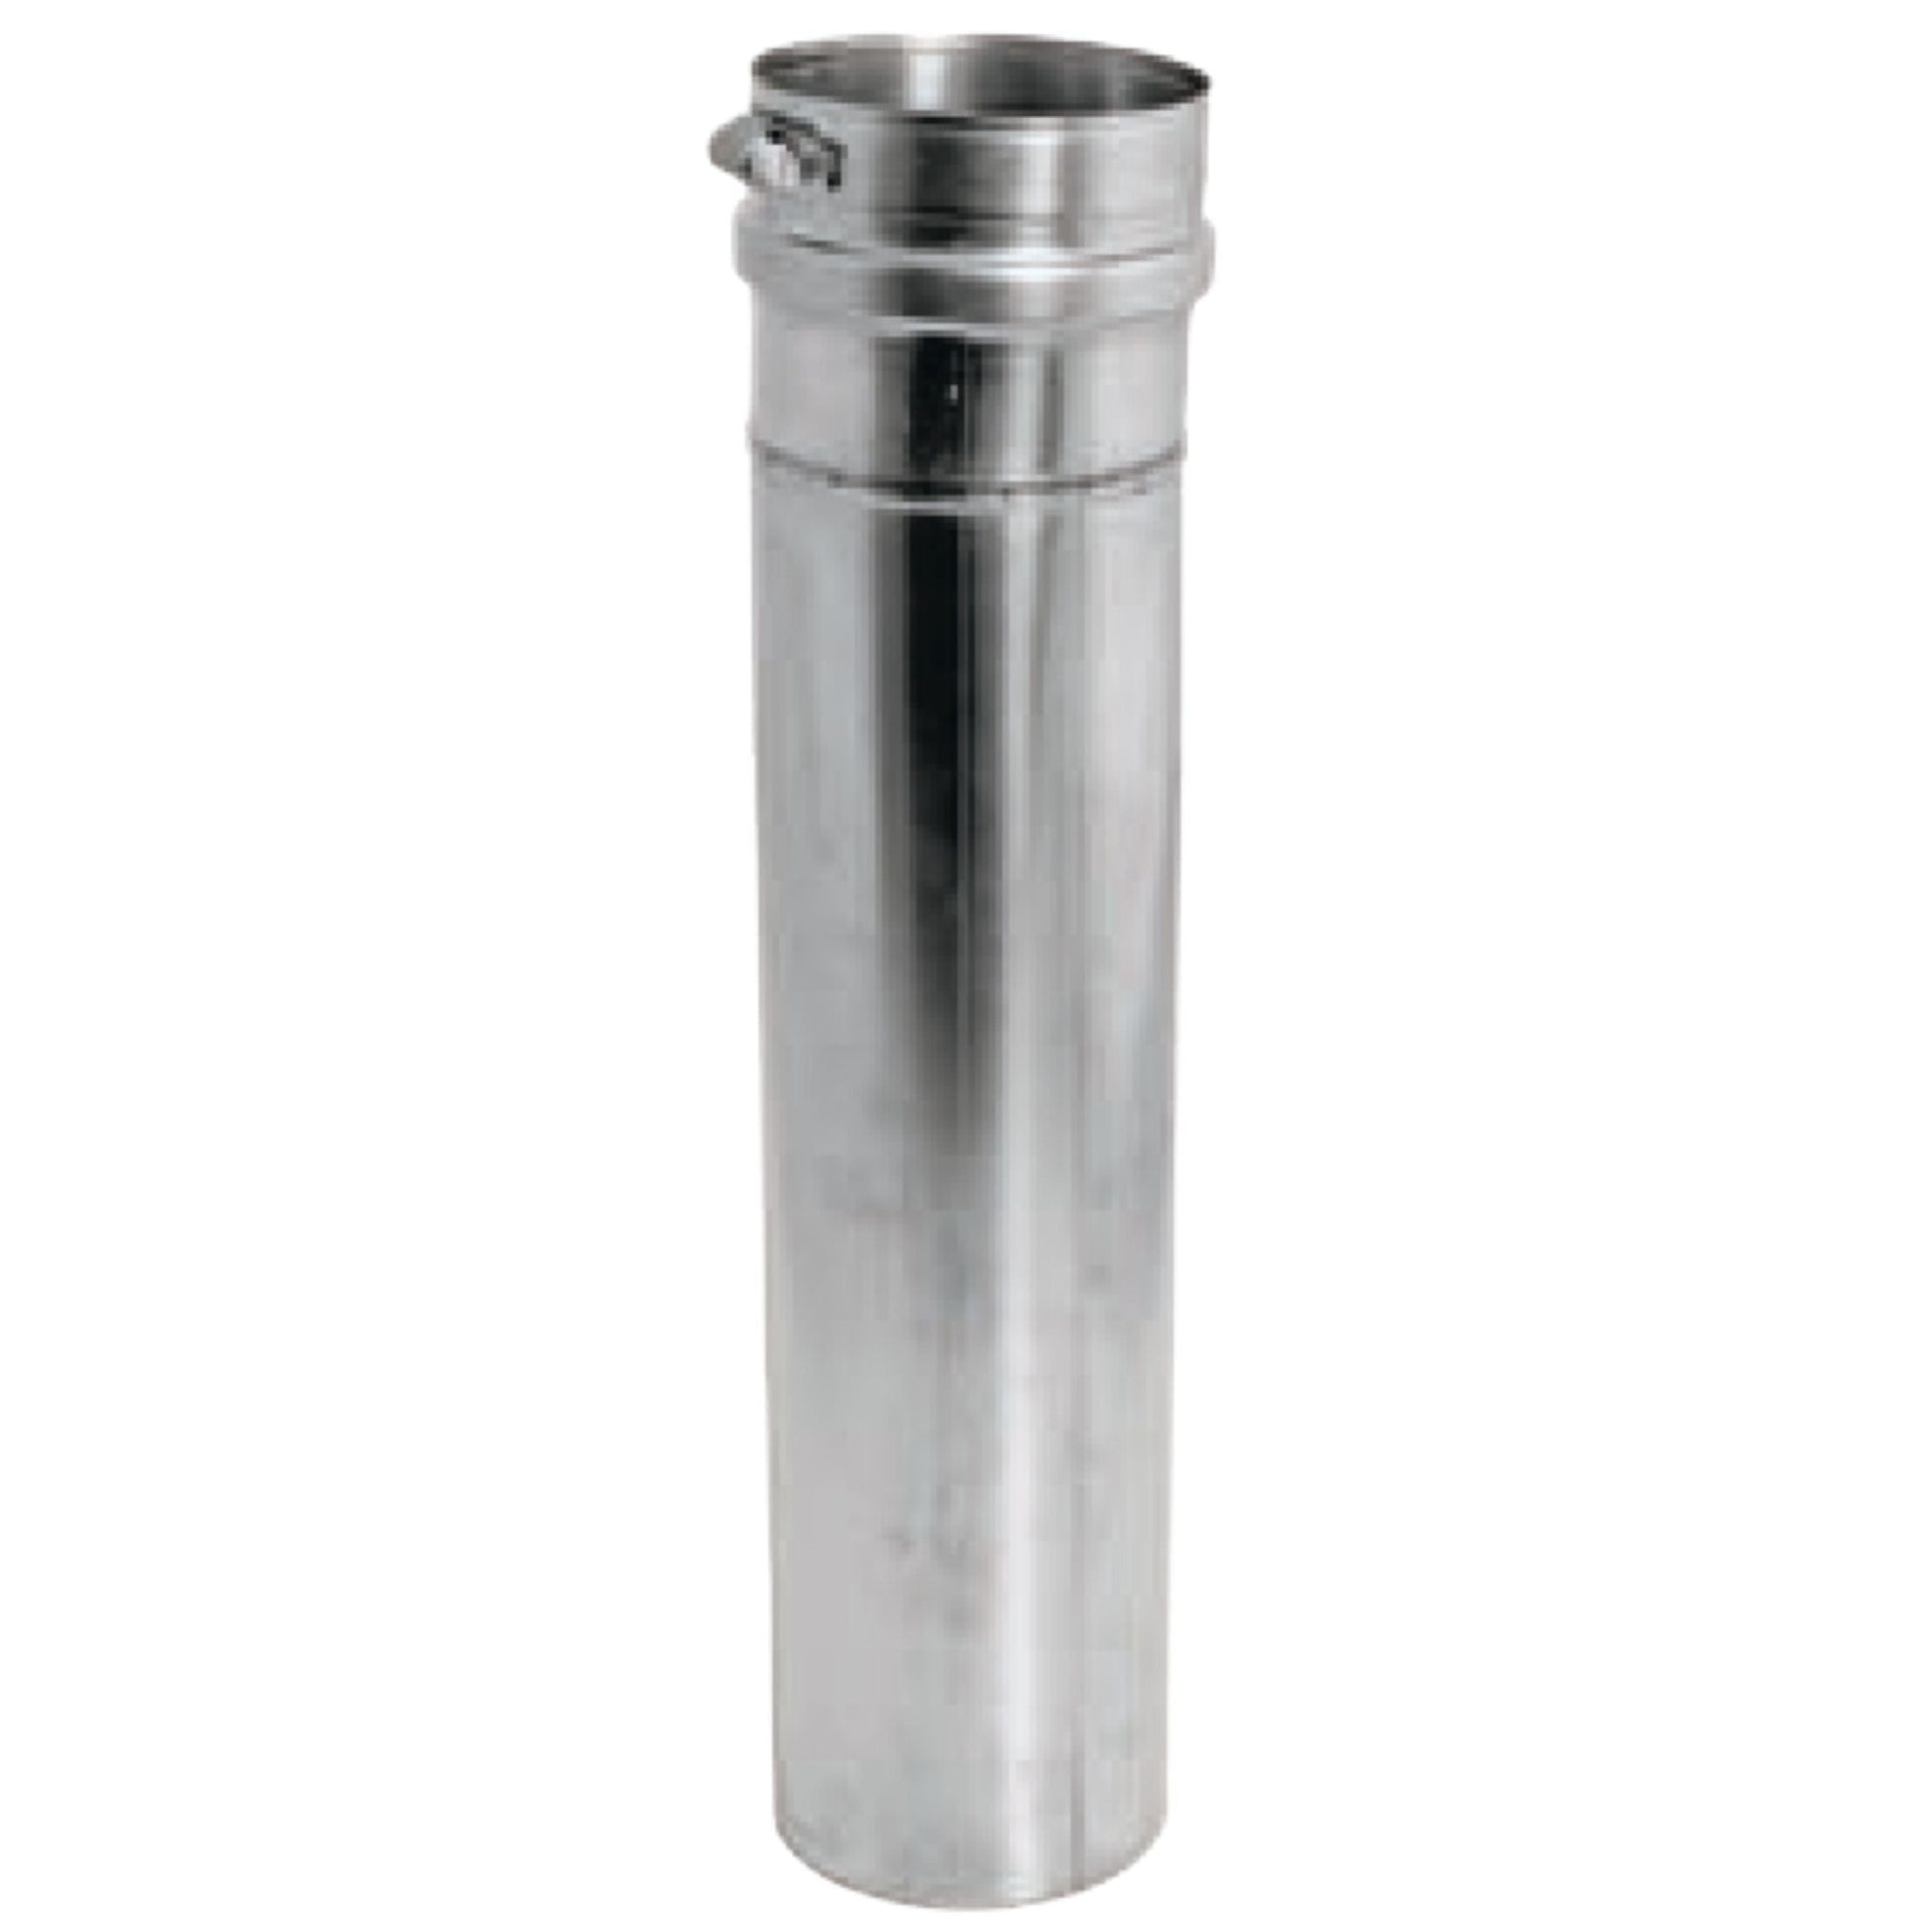 DuraVent FasNSeal 6" 2 Degree 29-4C Stainless Steel Adjustable Vent Length